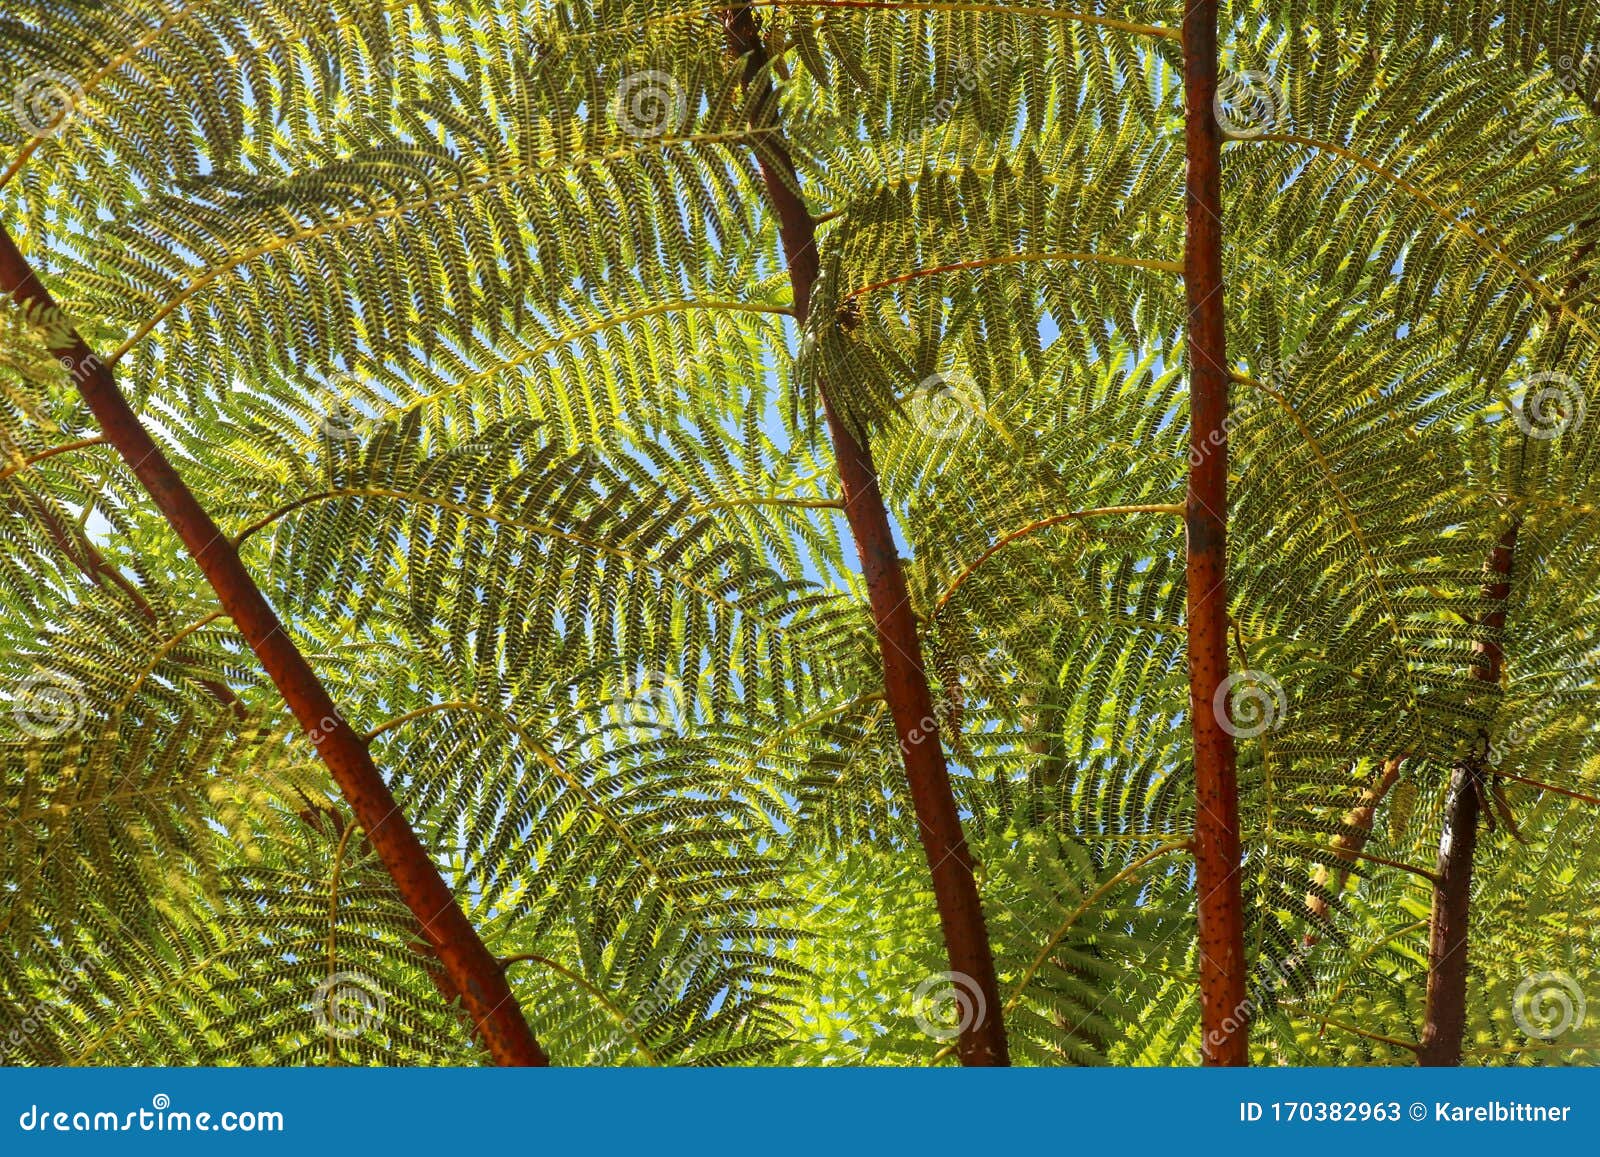 crown of tropical tree cyathea arborea. close up of branches of west indian treefern. the surface of the helecho gigante strain is